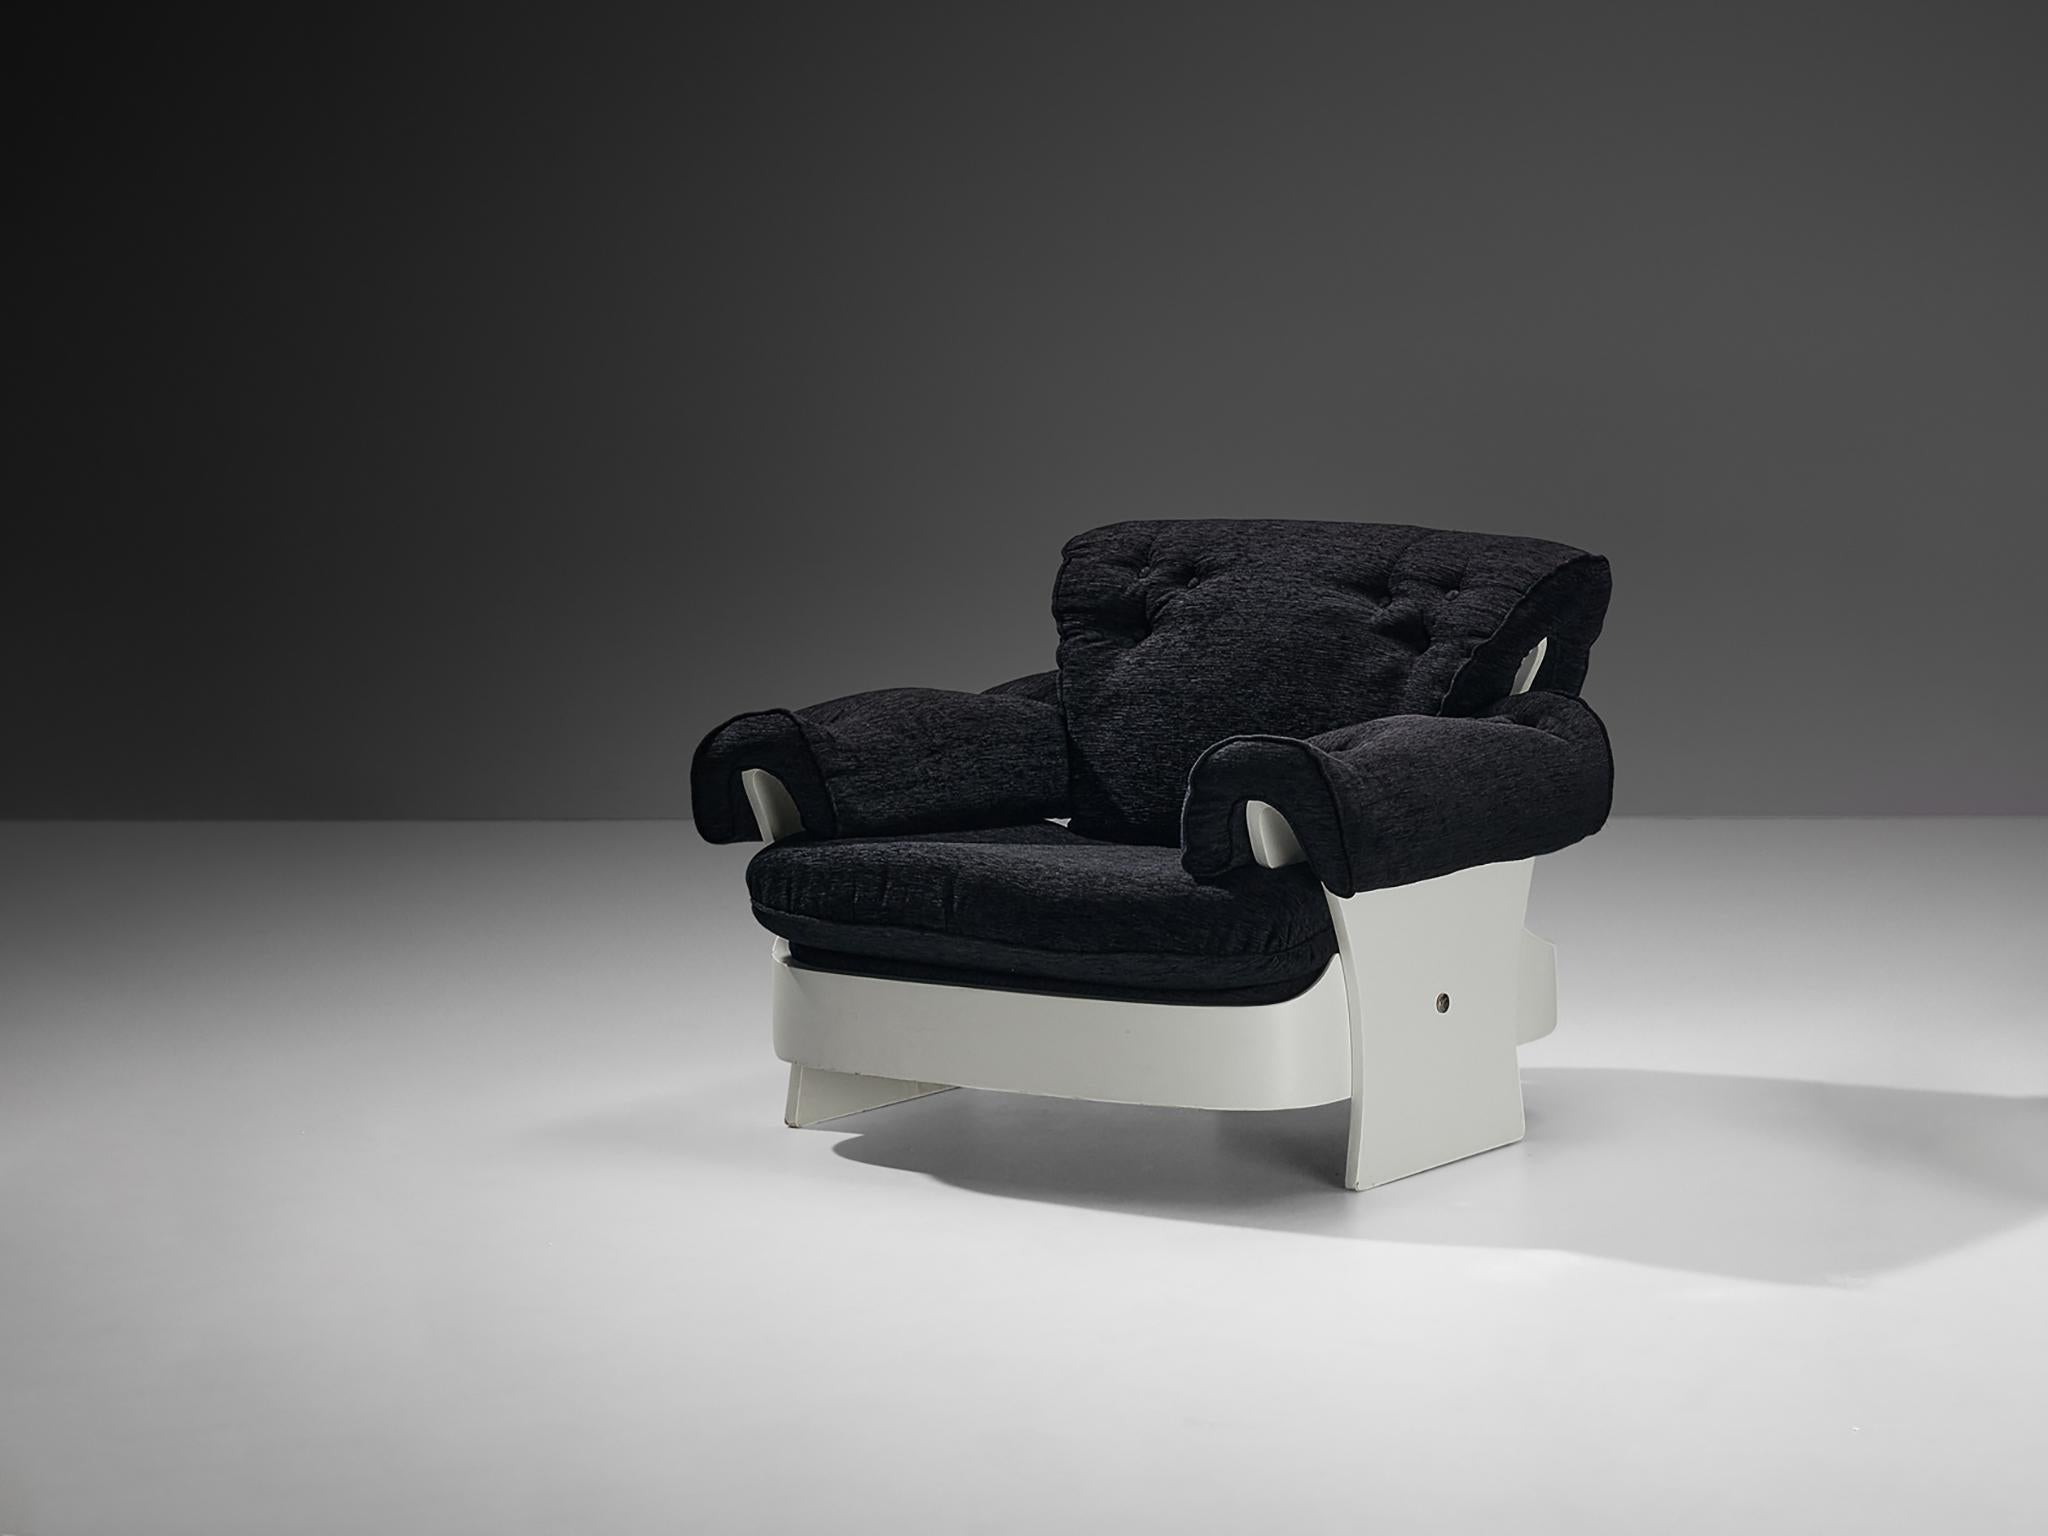 Lounge chair, plywood, fabric, Italy, 1970s

Armchair composed of white lacquered wood. The chair is build up from a square base with rounded edges and three large legs, one in the back and one at each side. The wooden parts are connected by metal